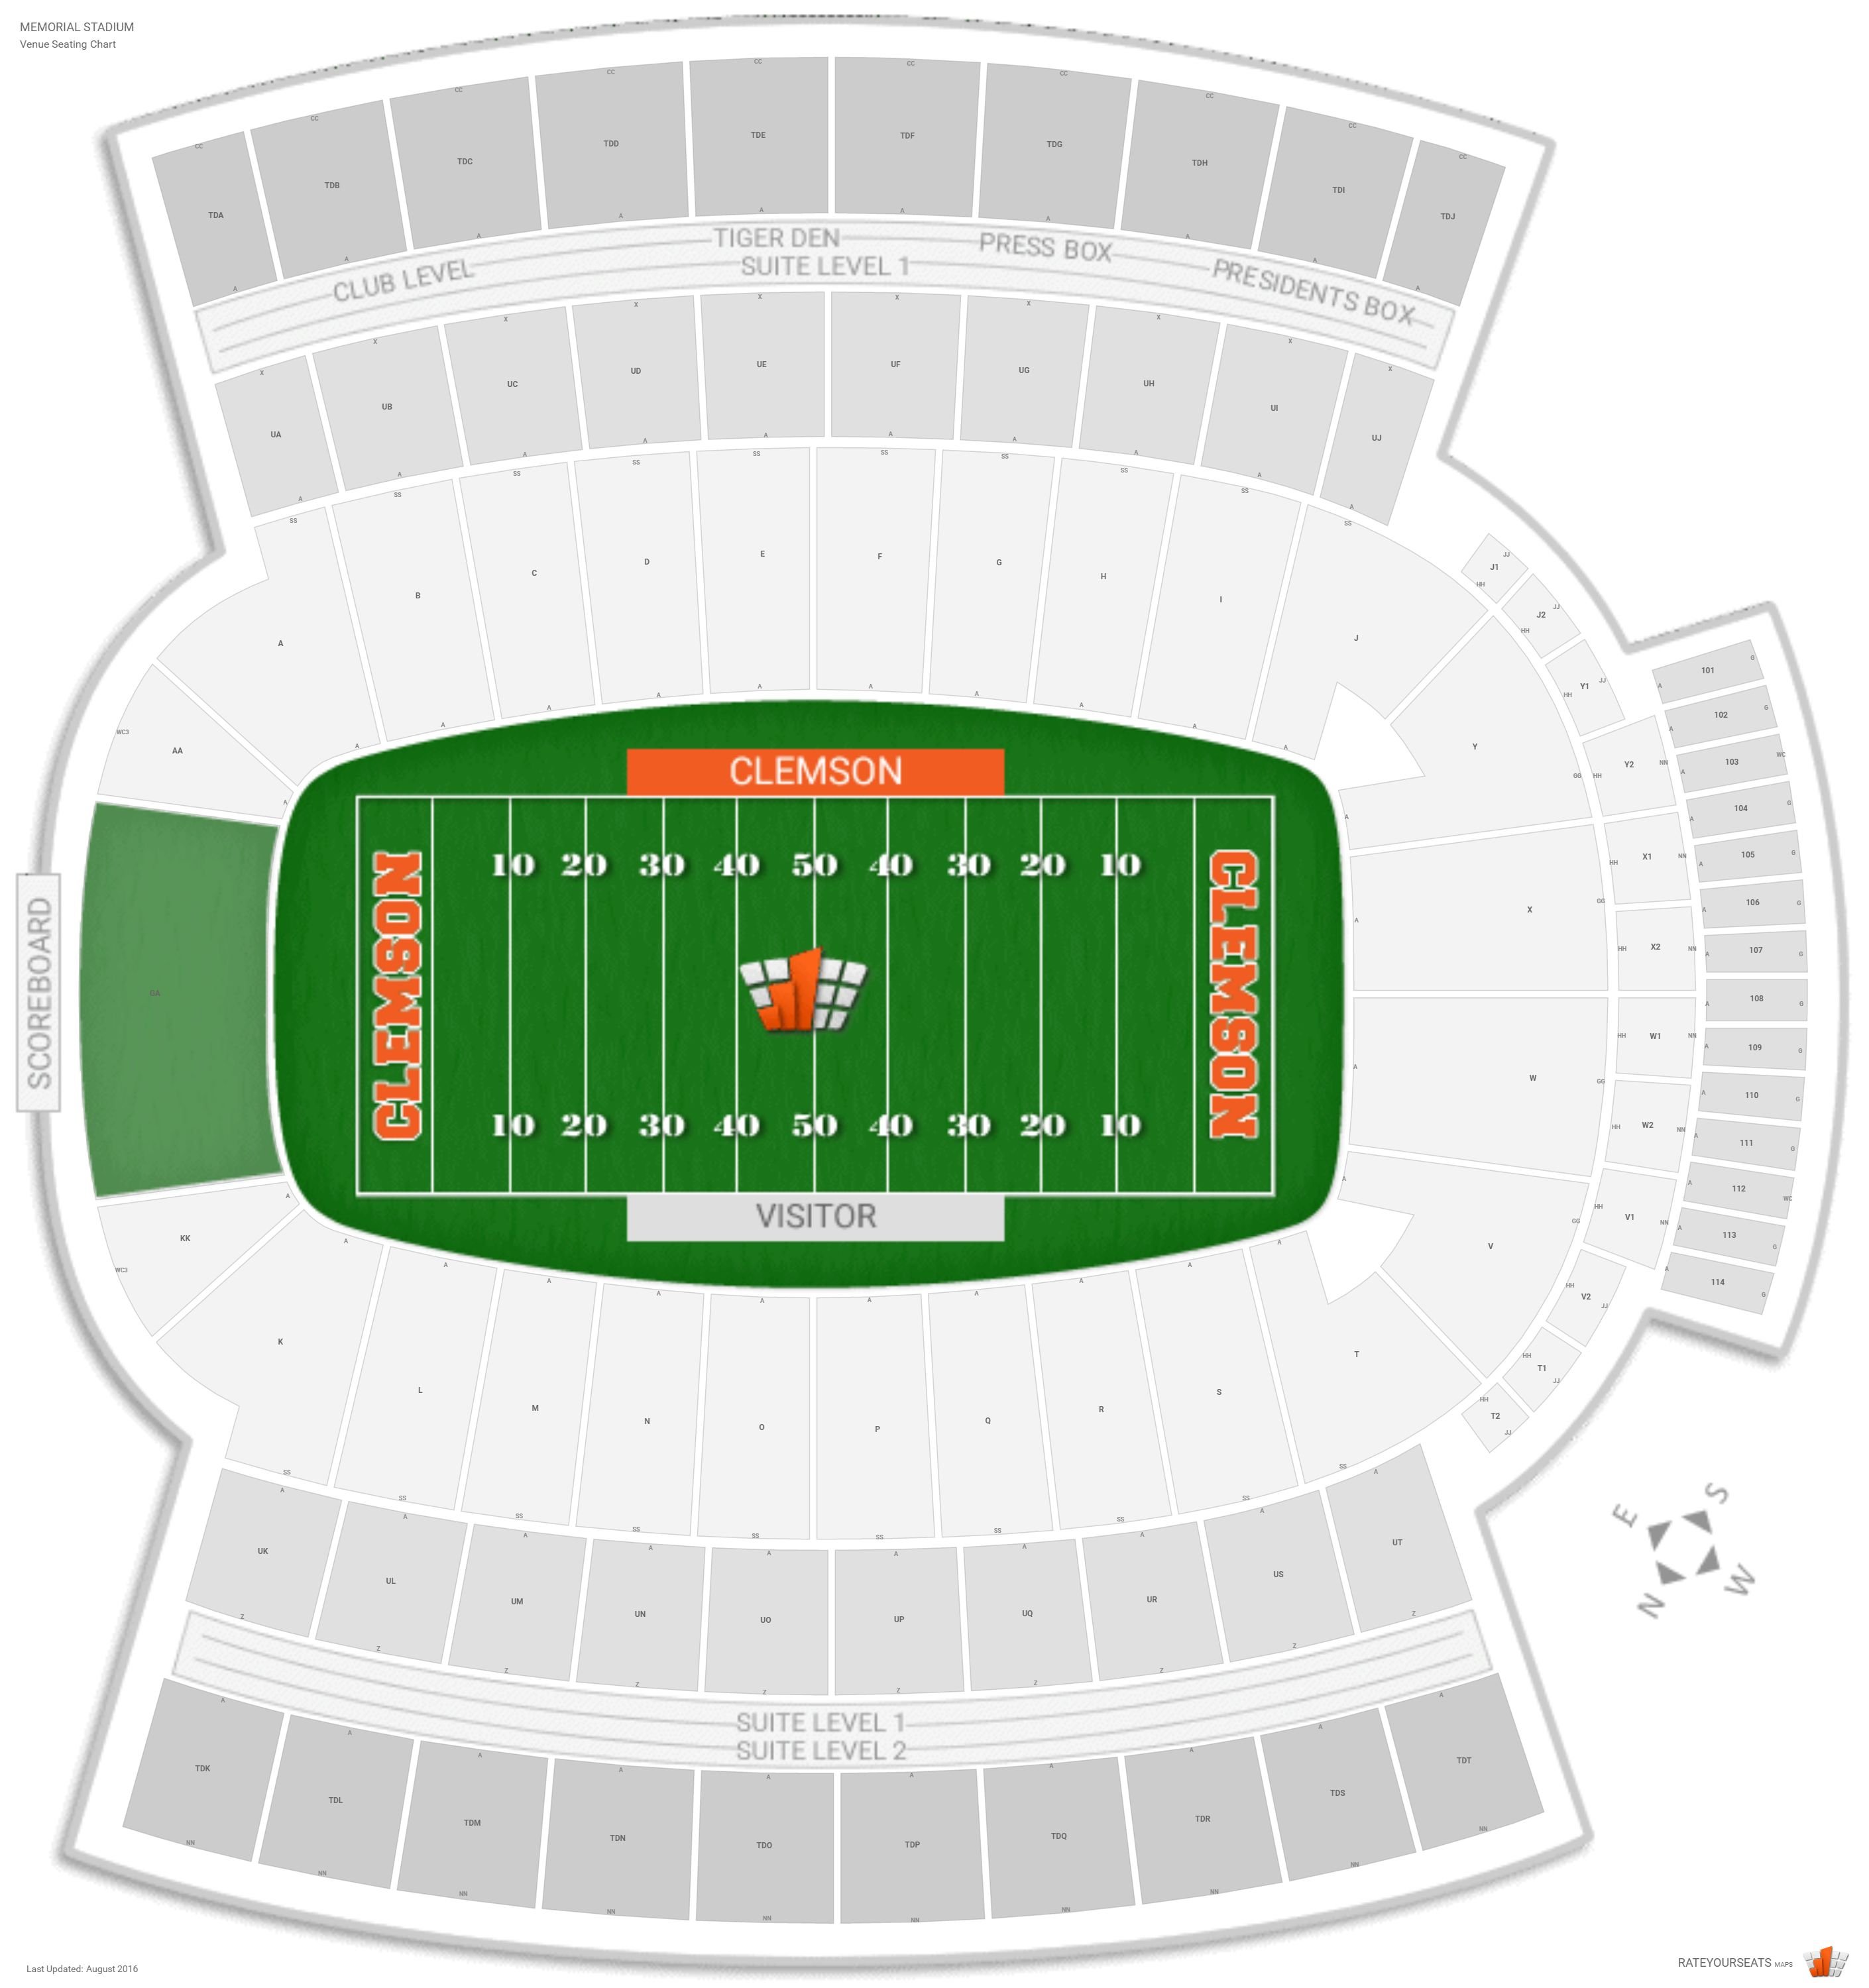 Clemson Football Seating Chart With Seat Numbers